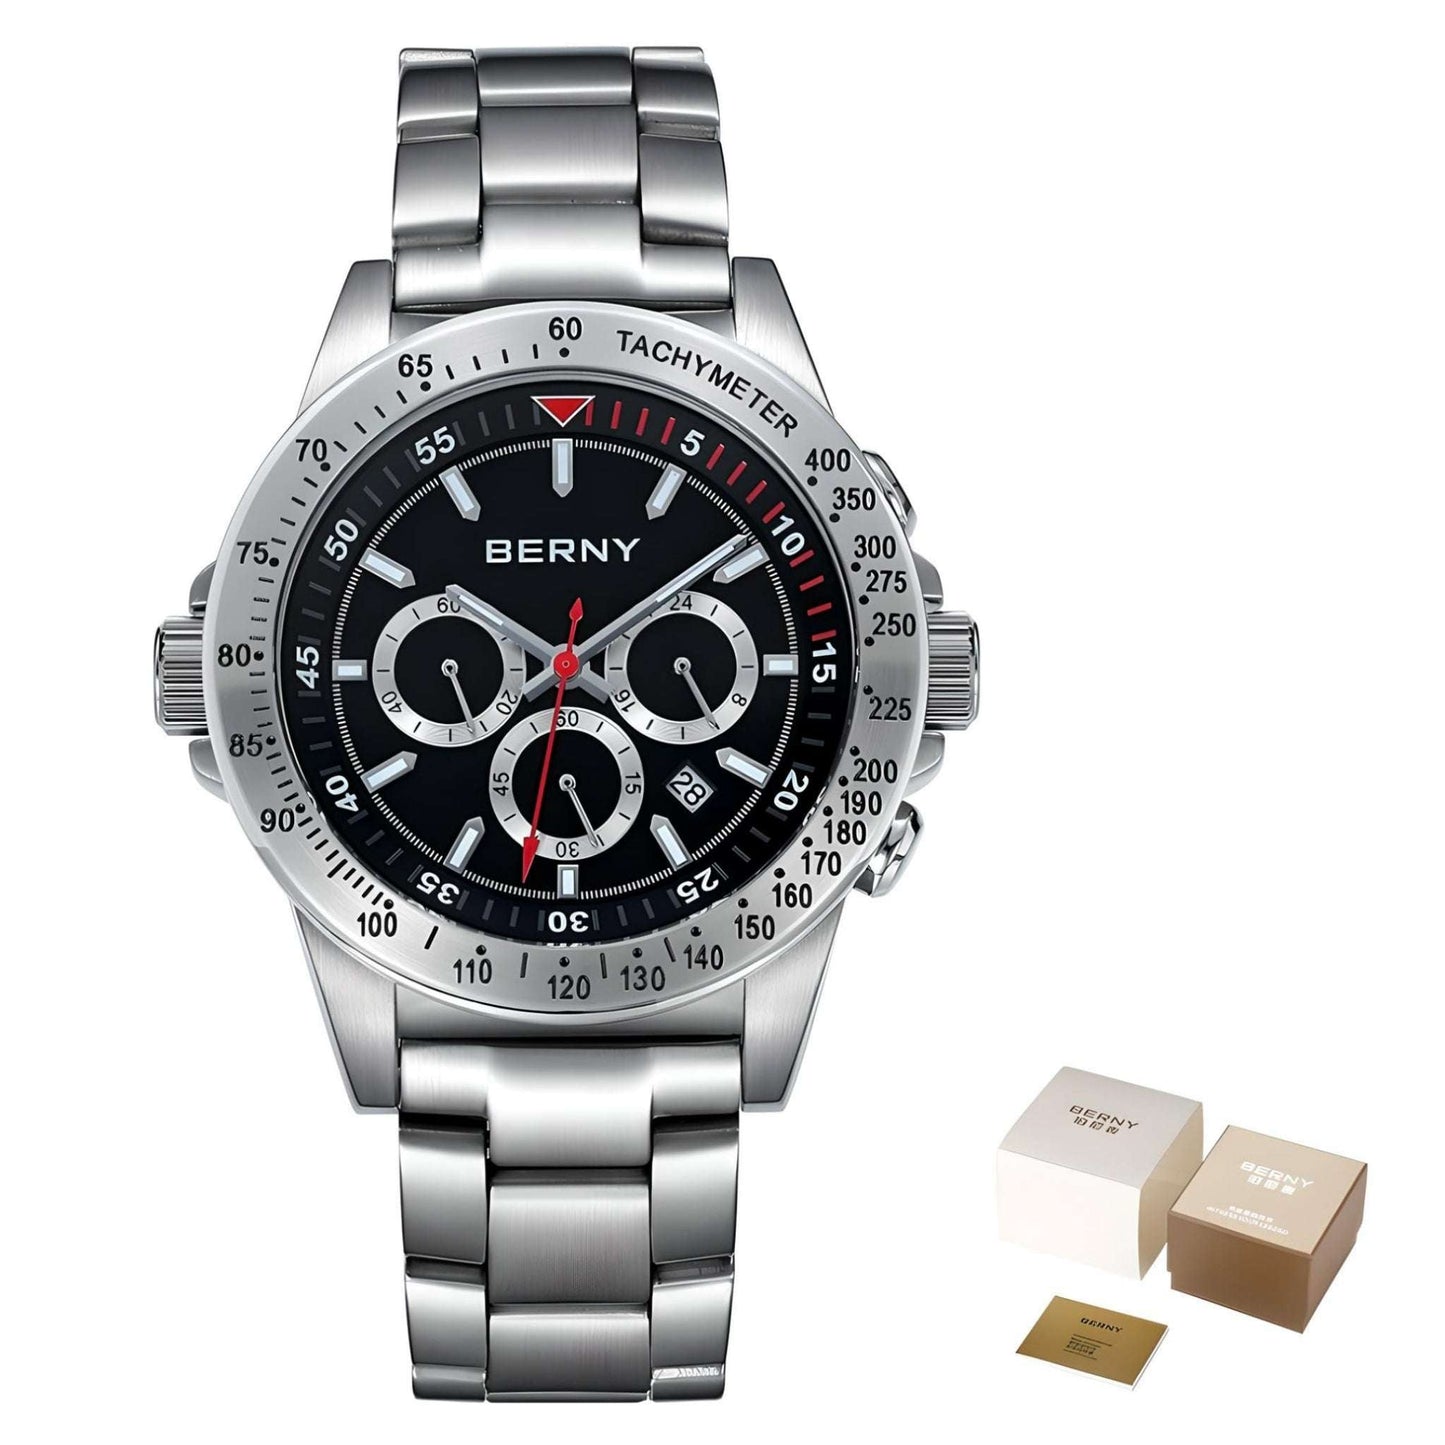 Ocean Master Men's Sapphire Chronograph Dive Watch - Gifting By Julia M